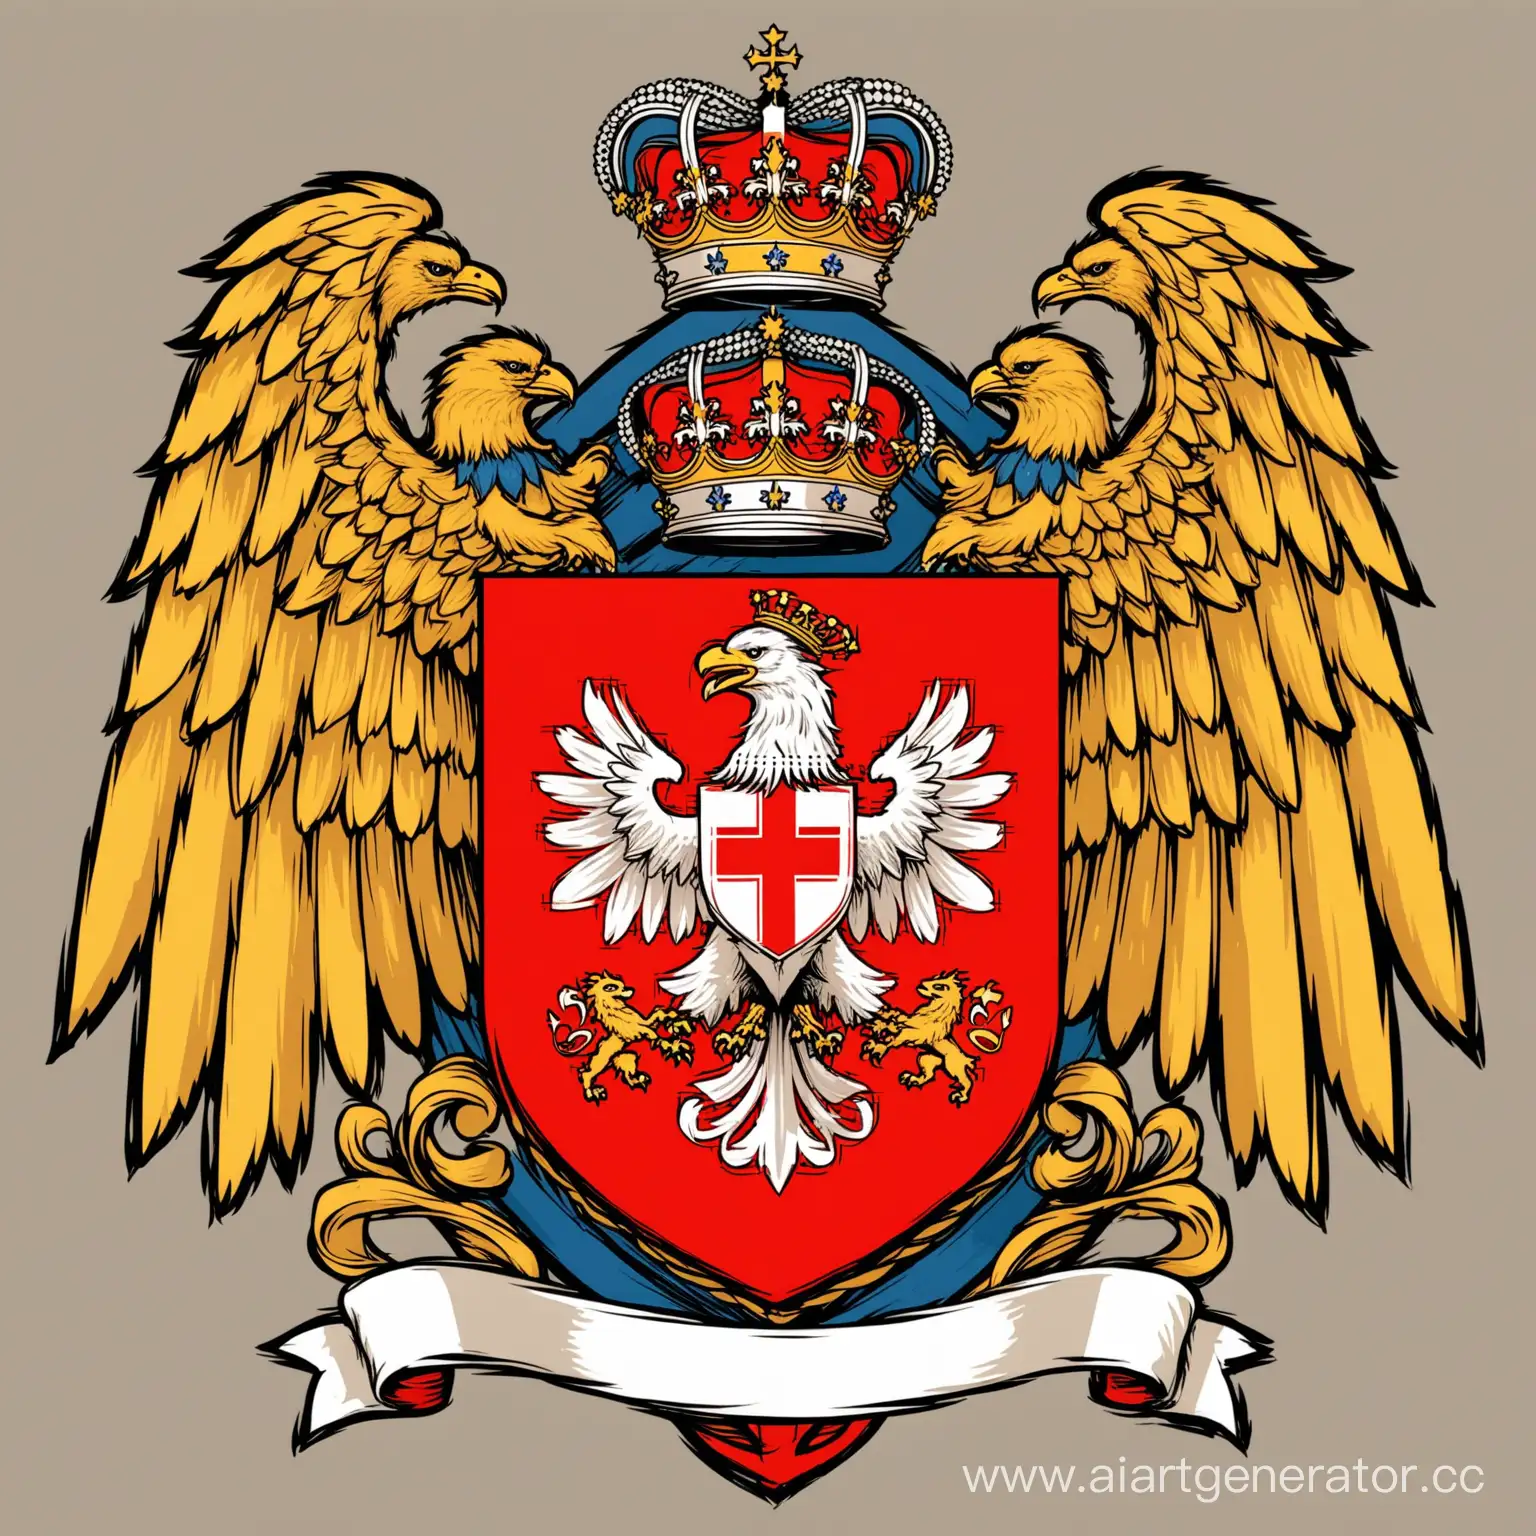 Symbolic-Coat-of-Arms-Illustrating-Confidence-and-Strength